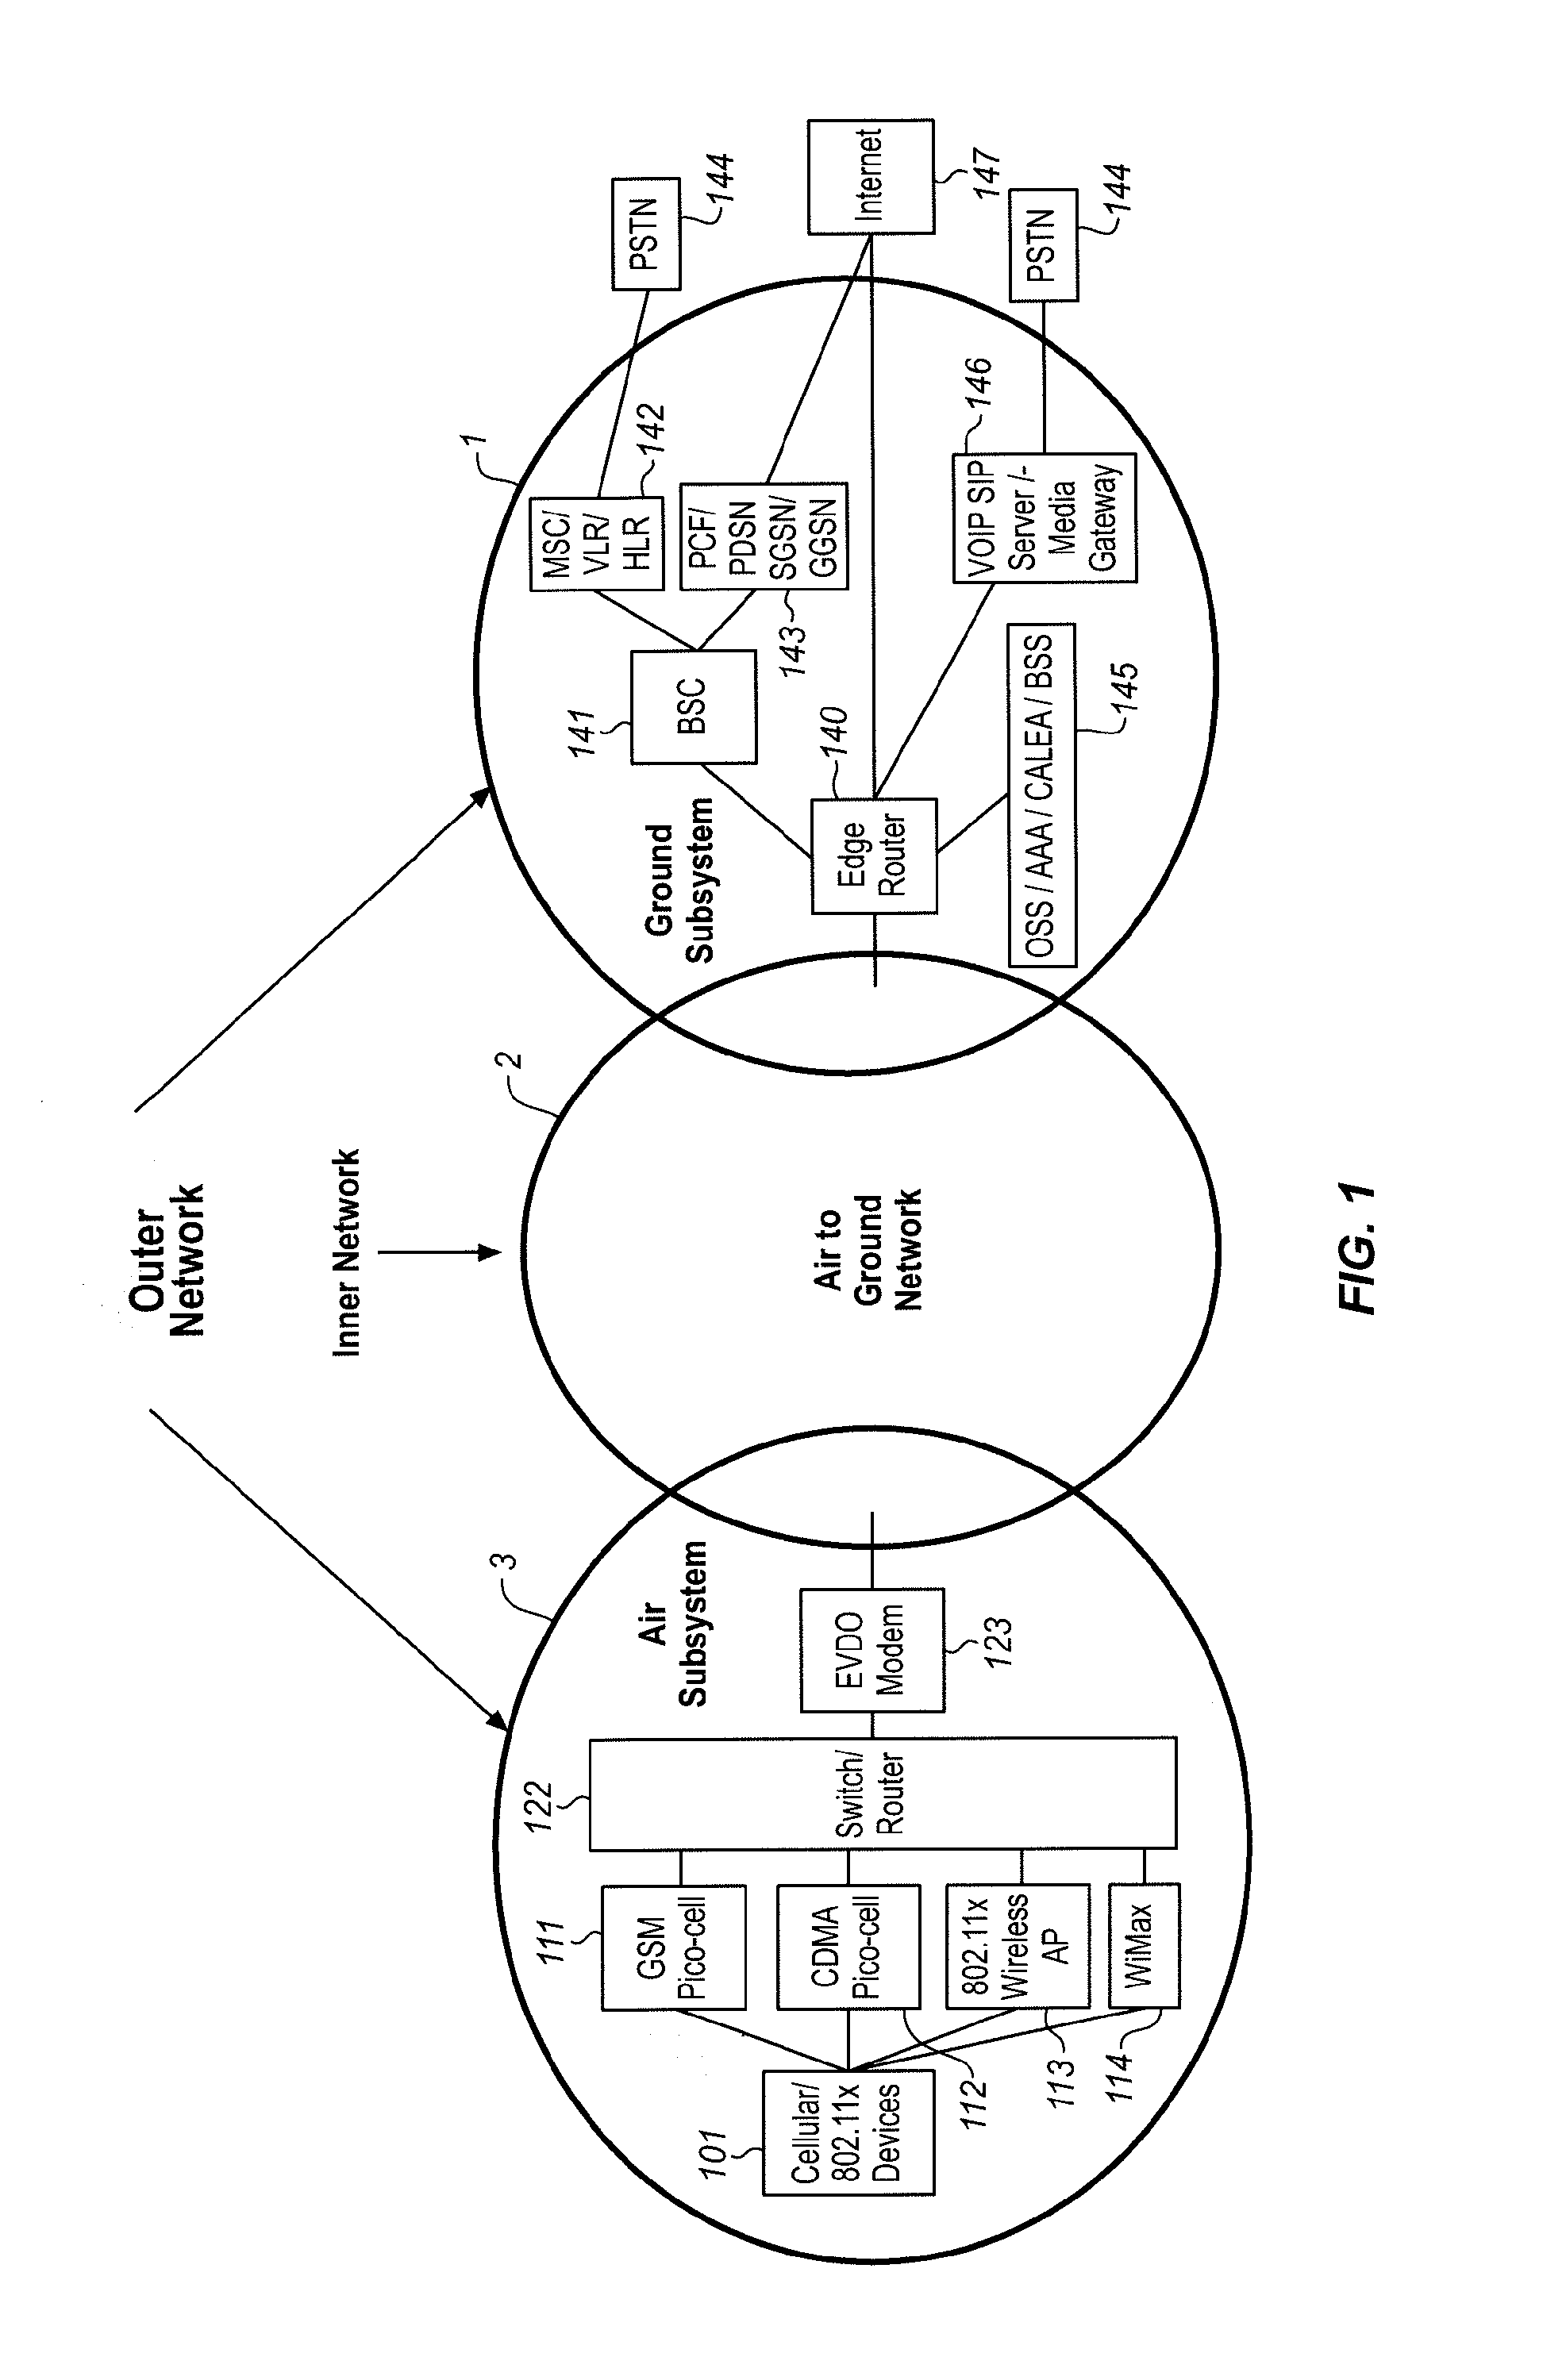 System for creating an air-to-ground IP tunnel in an airborne wireless cellular network to differentiate individual passengers